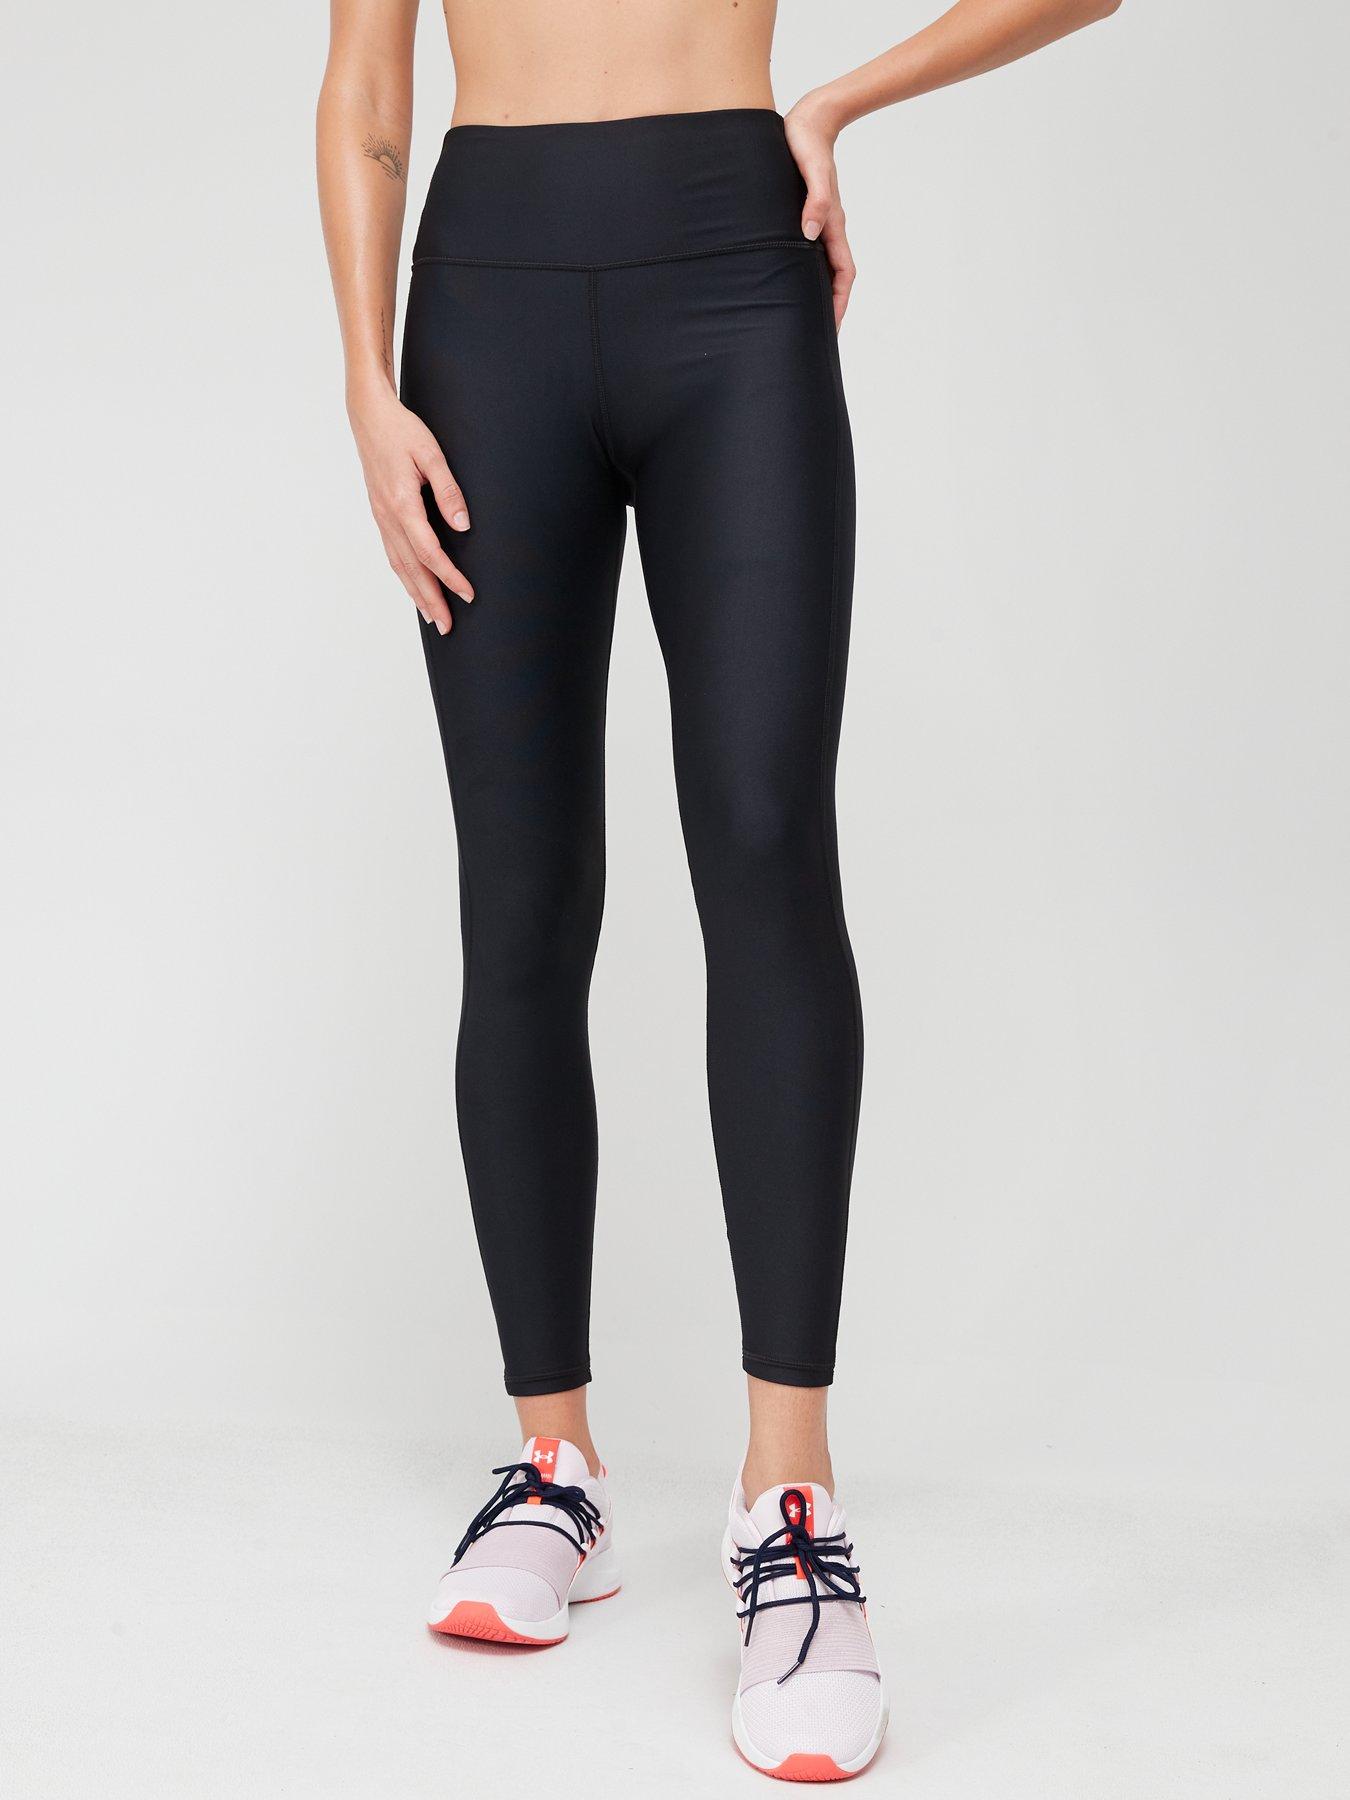 Under armour, Tights & leggings, Womens sports clothing